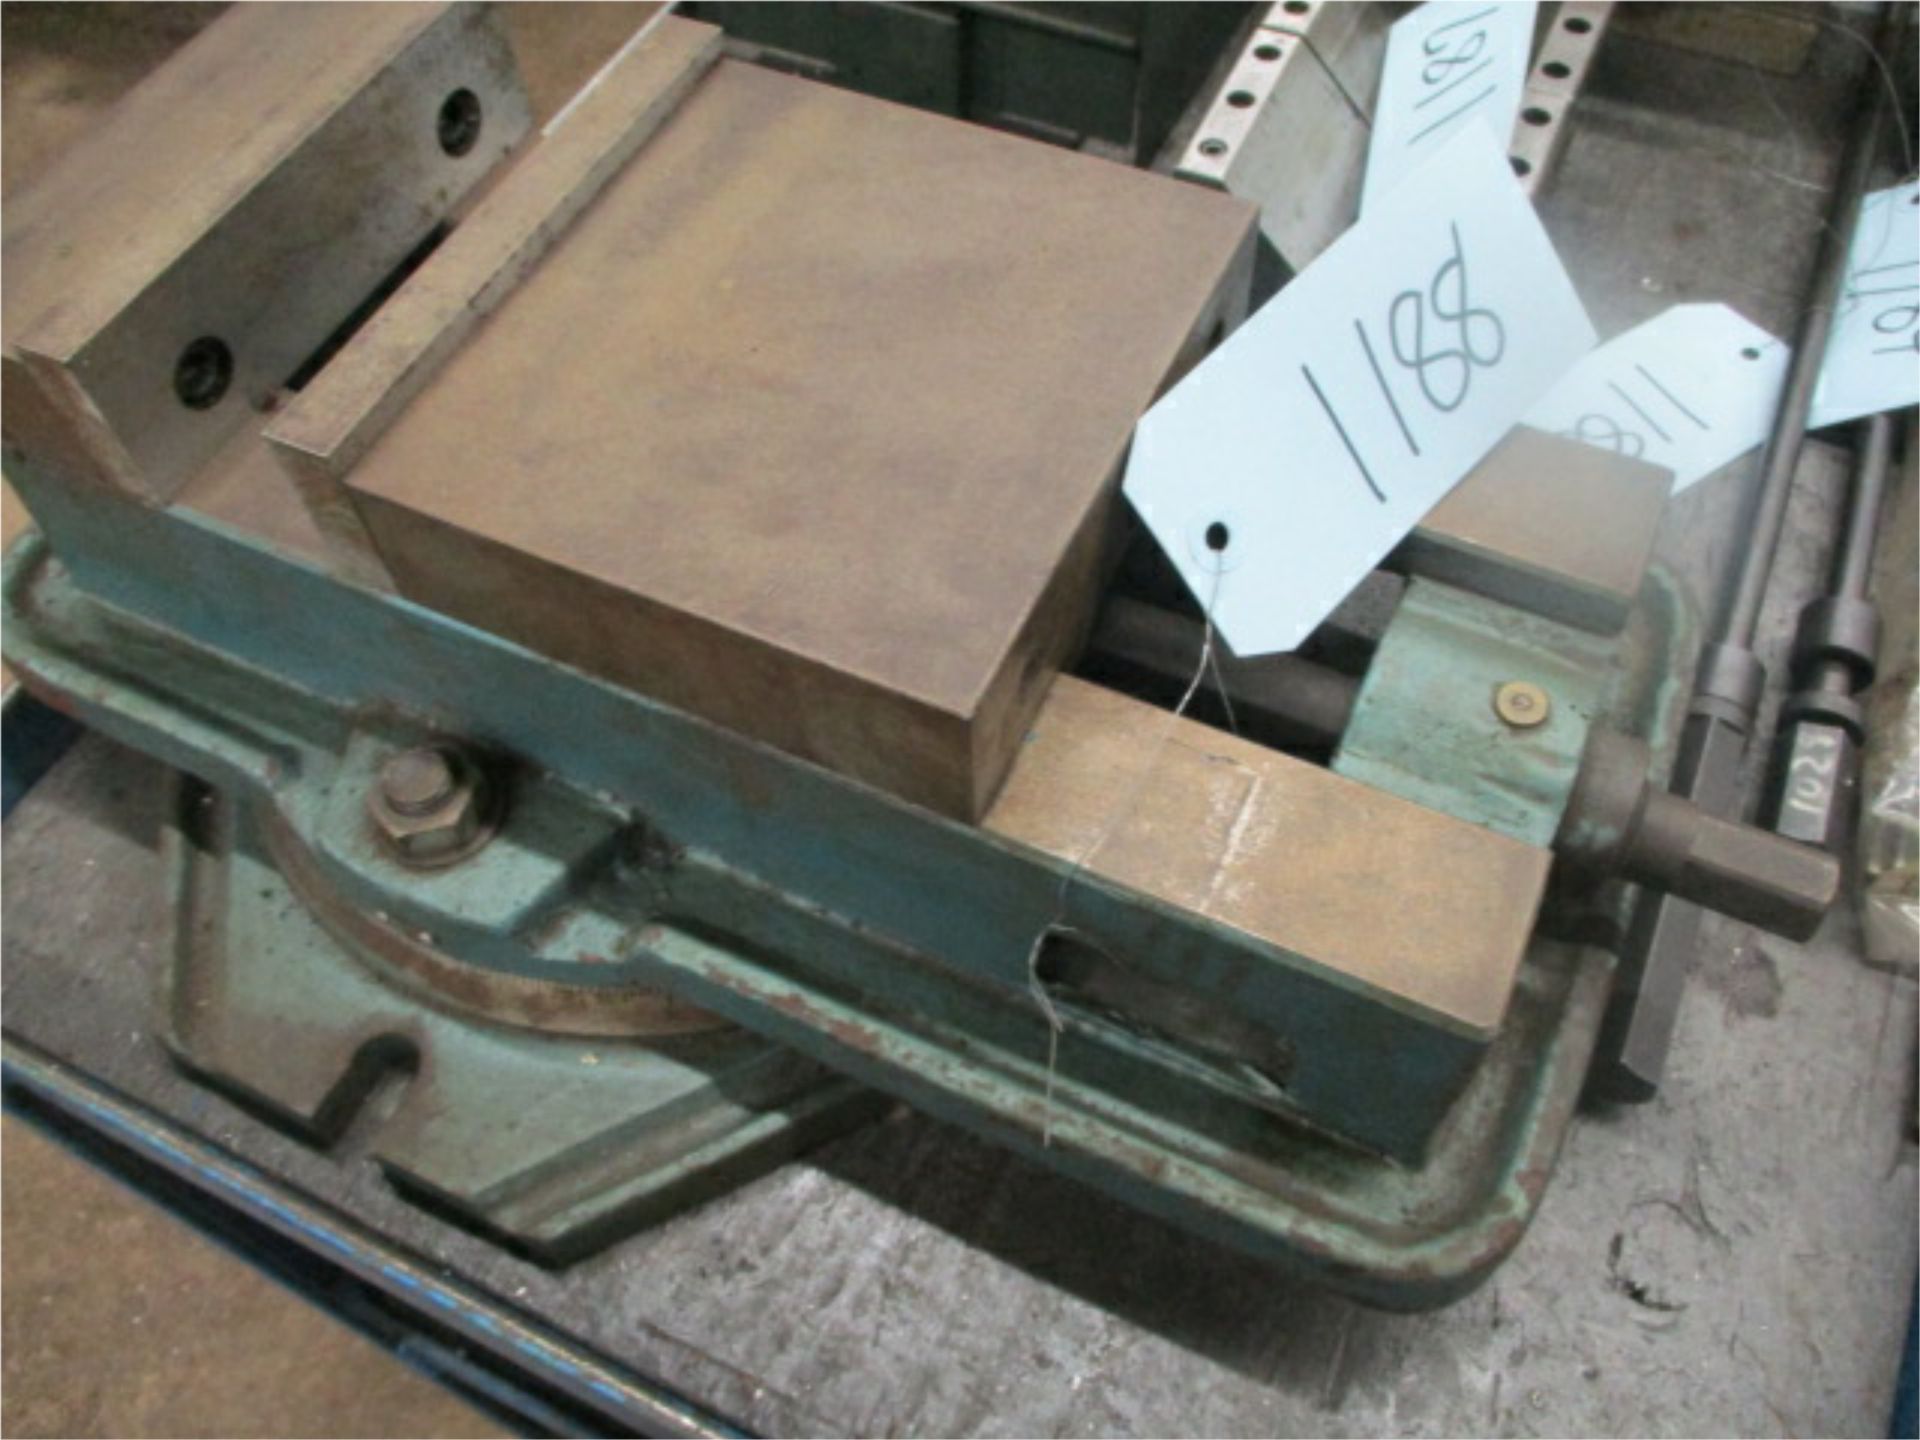 6" 360* Rotational Mill Vise